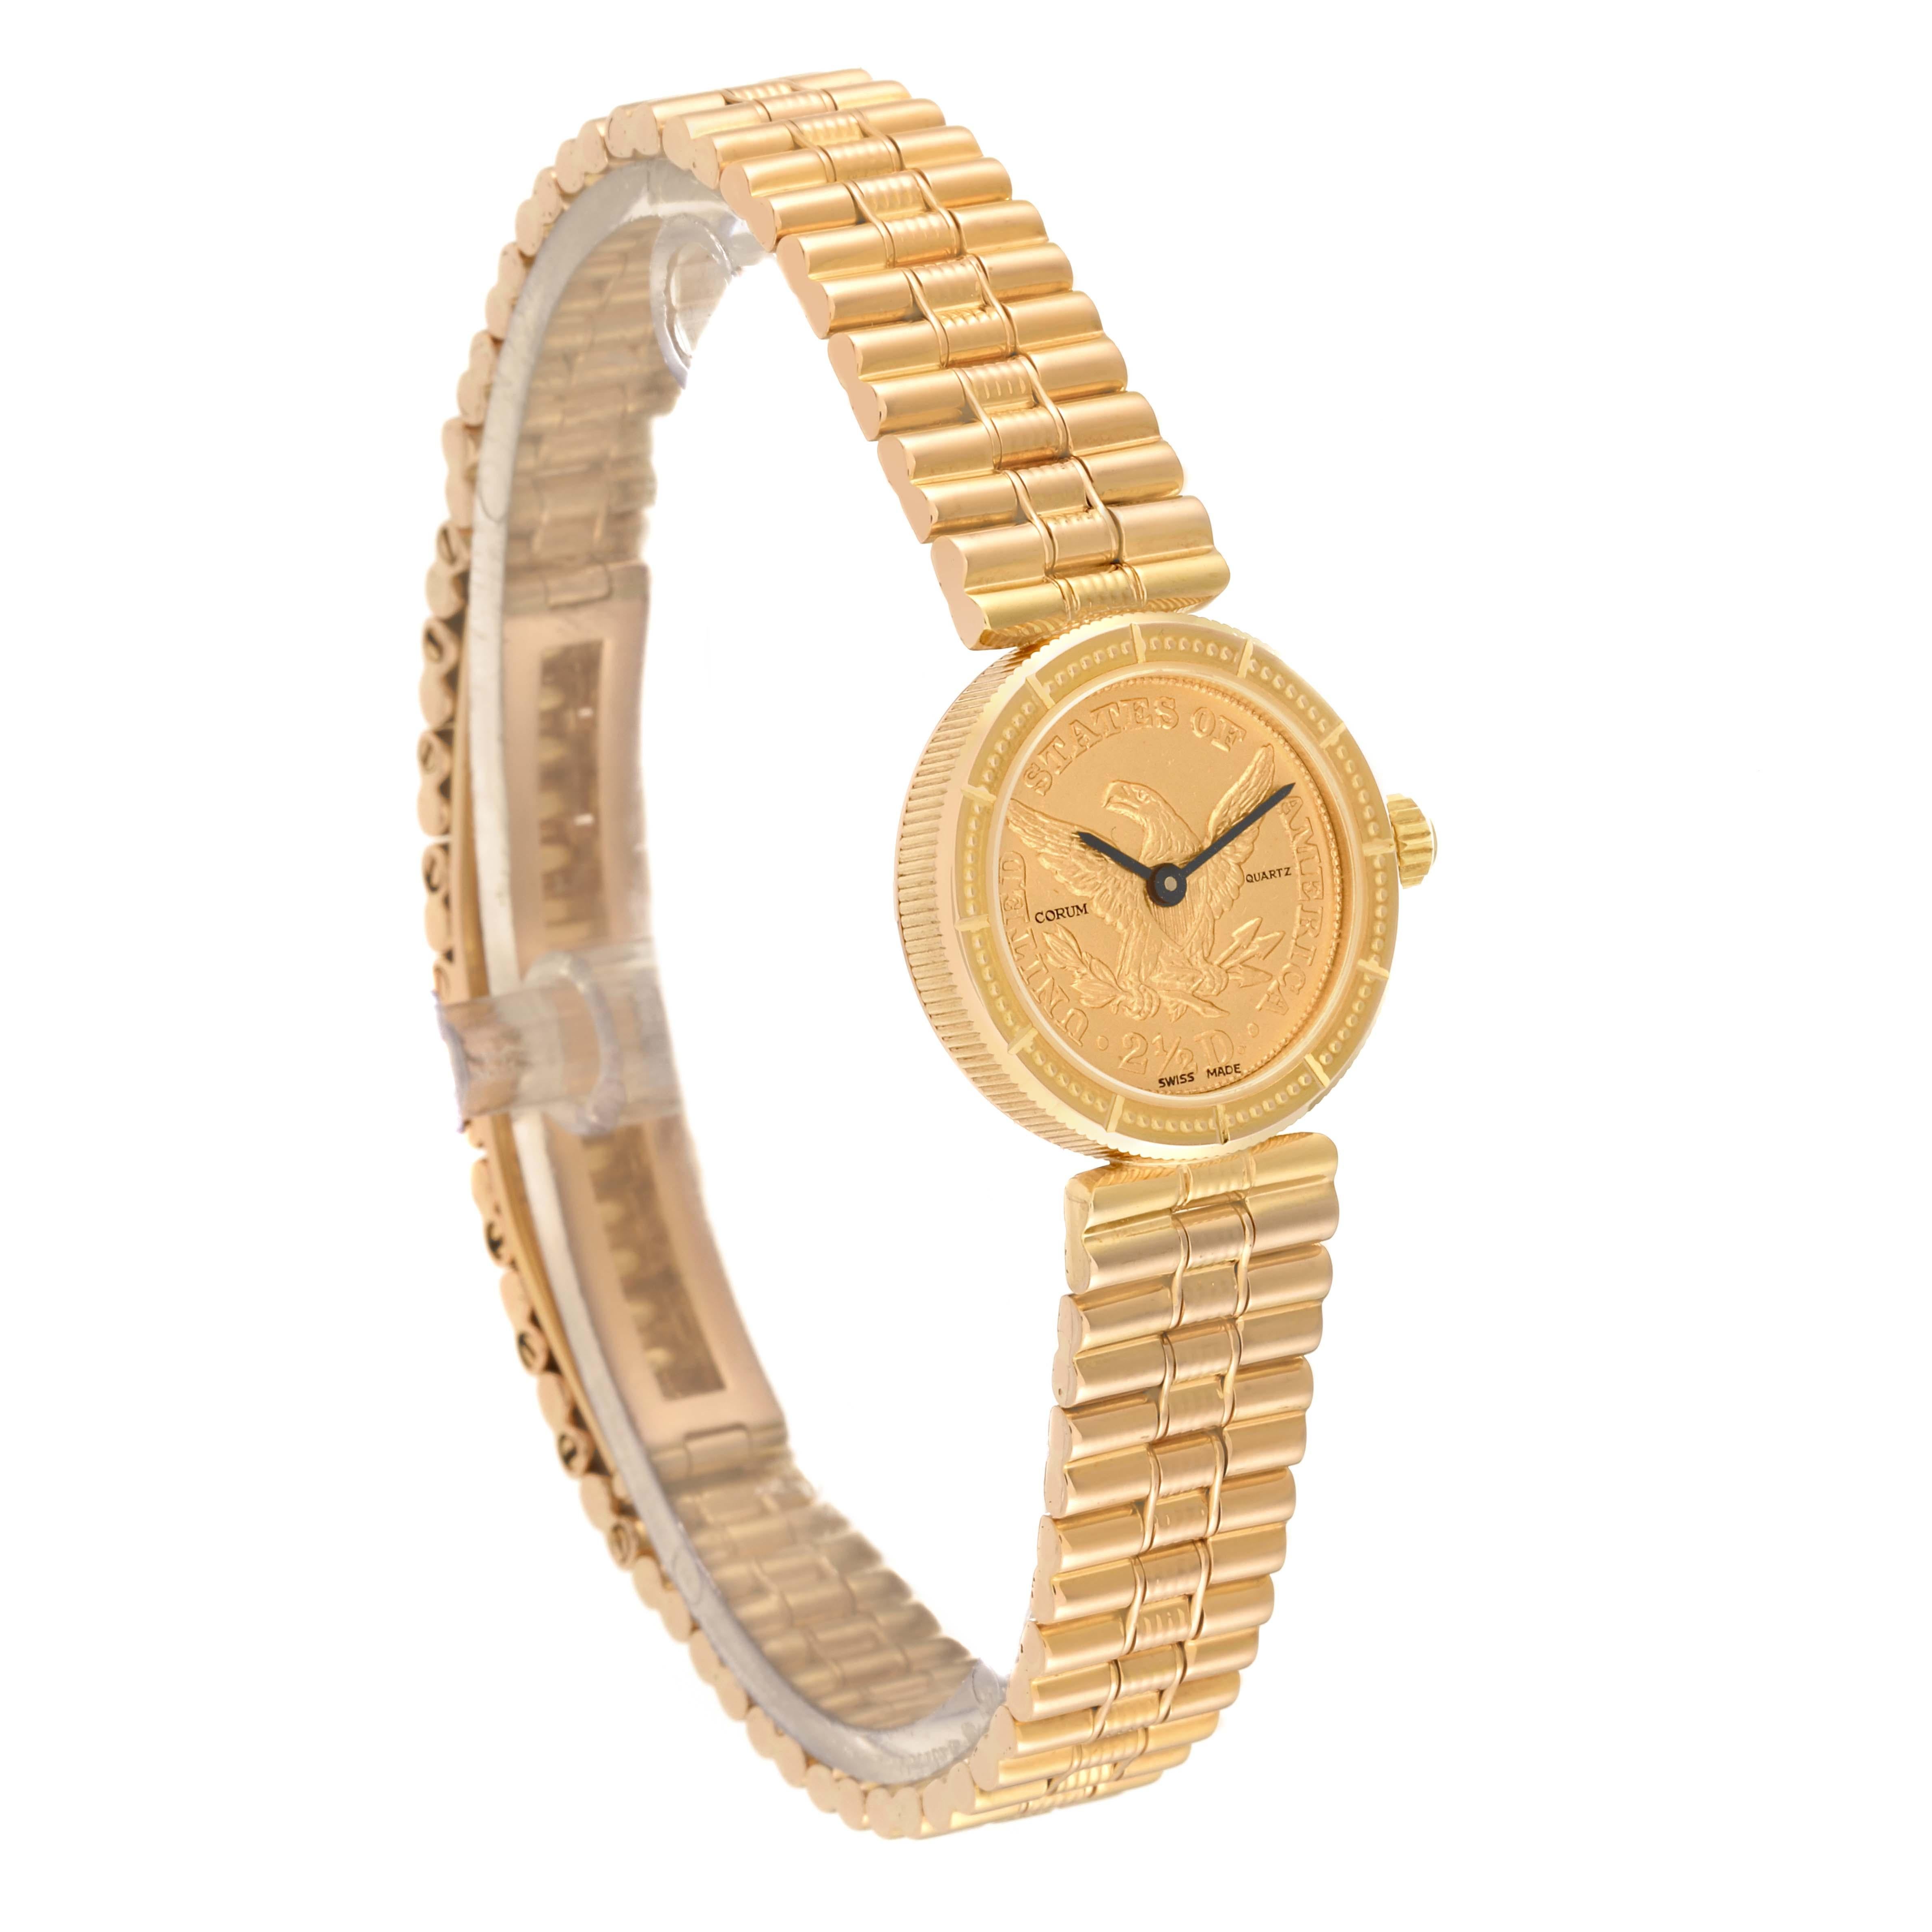 Corum 2.5 Dollars Eagle Liberty Coin Yellow Gold Ladies Watch 1852 For Sale 3